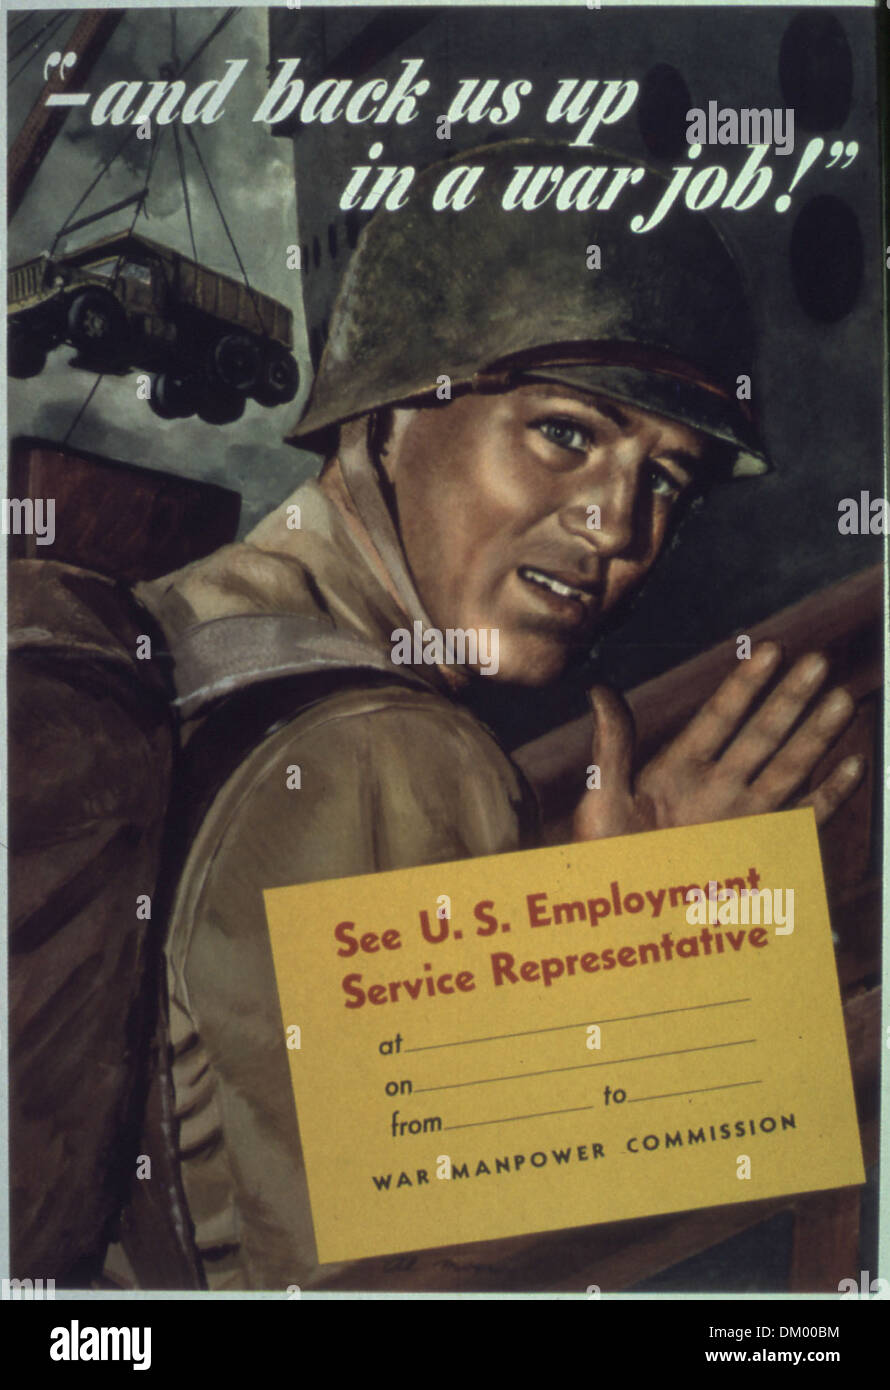 '...and back us up in a war job' 513848 Stock Photo